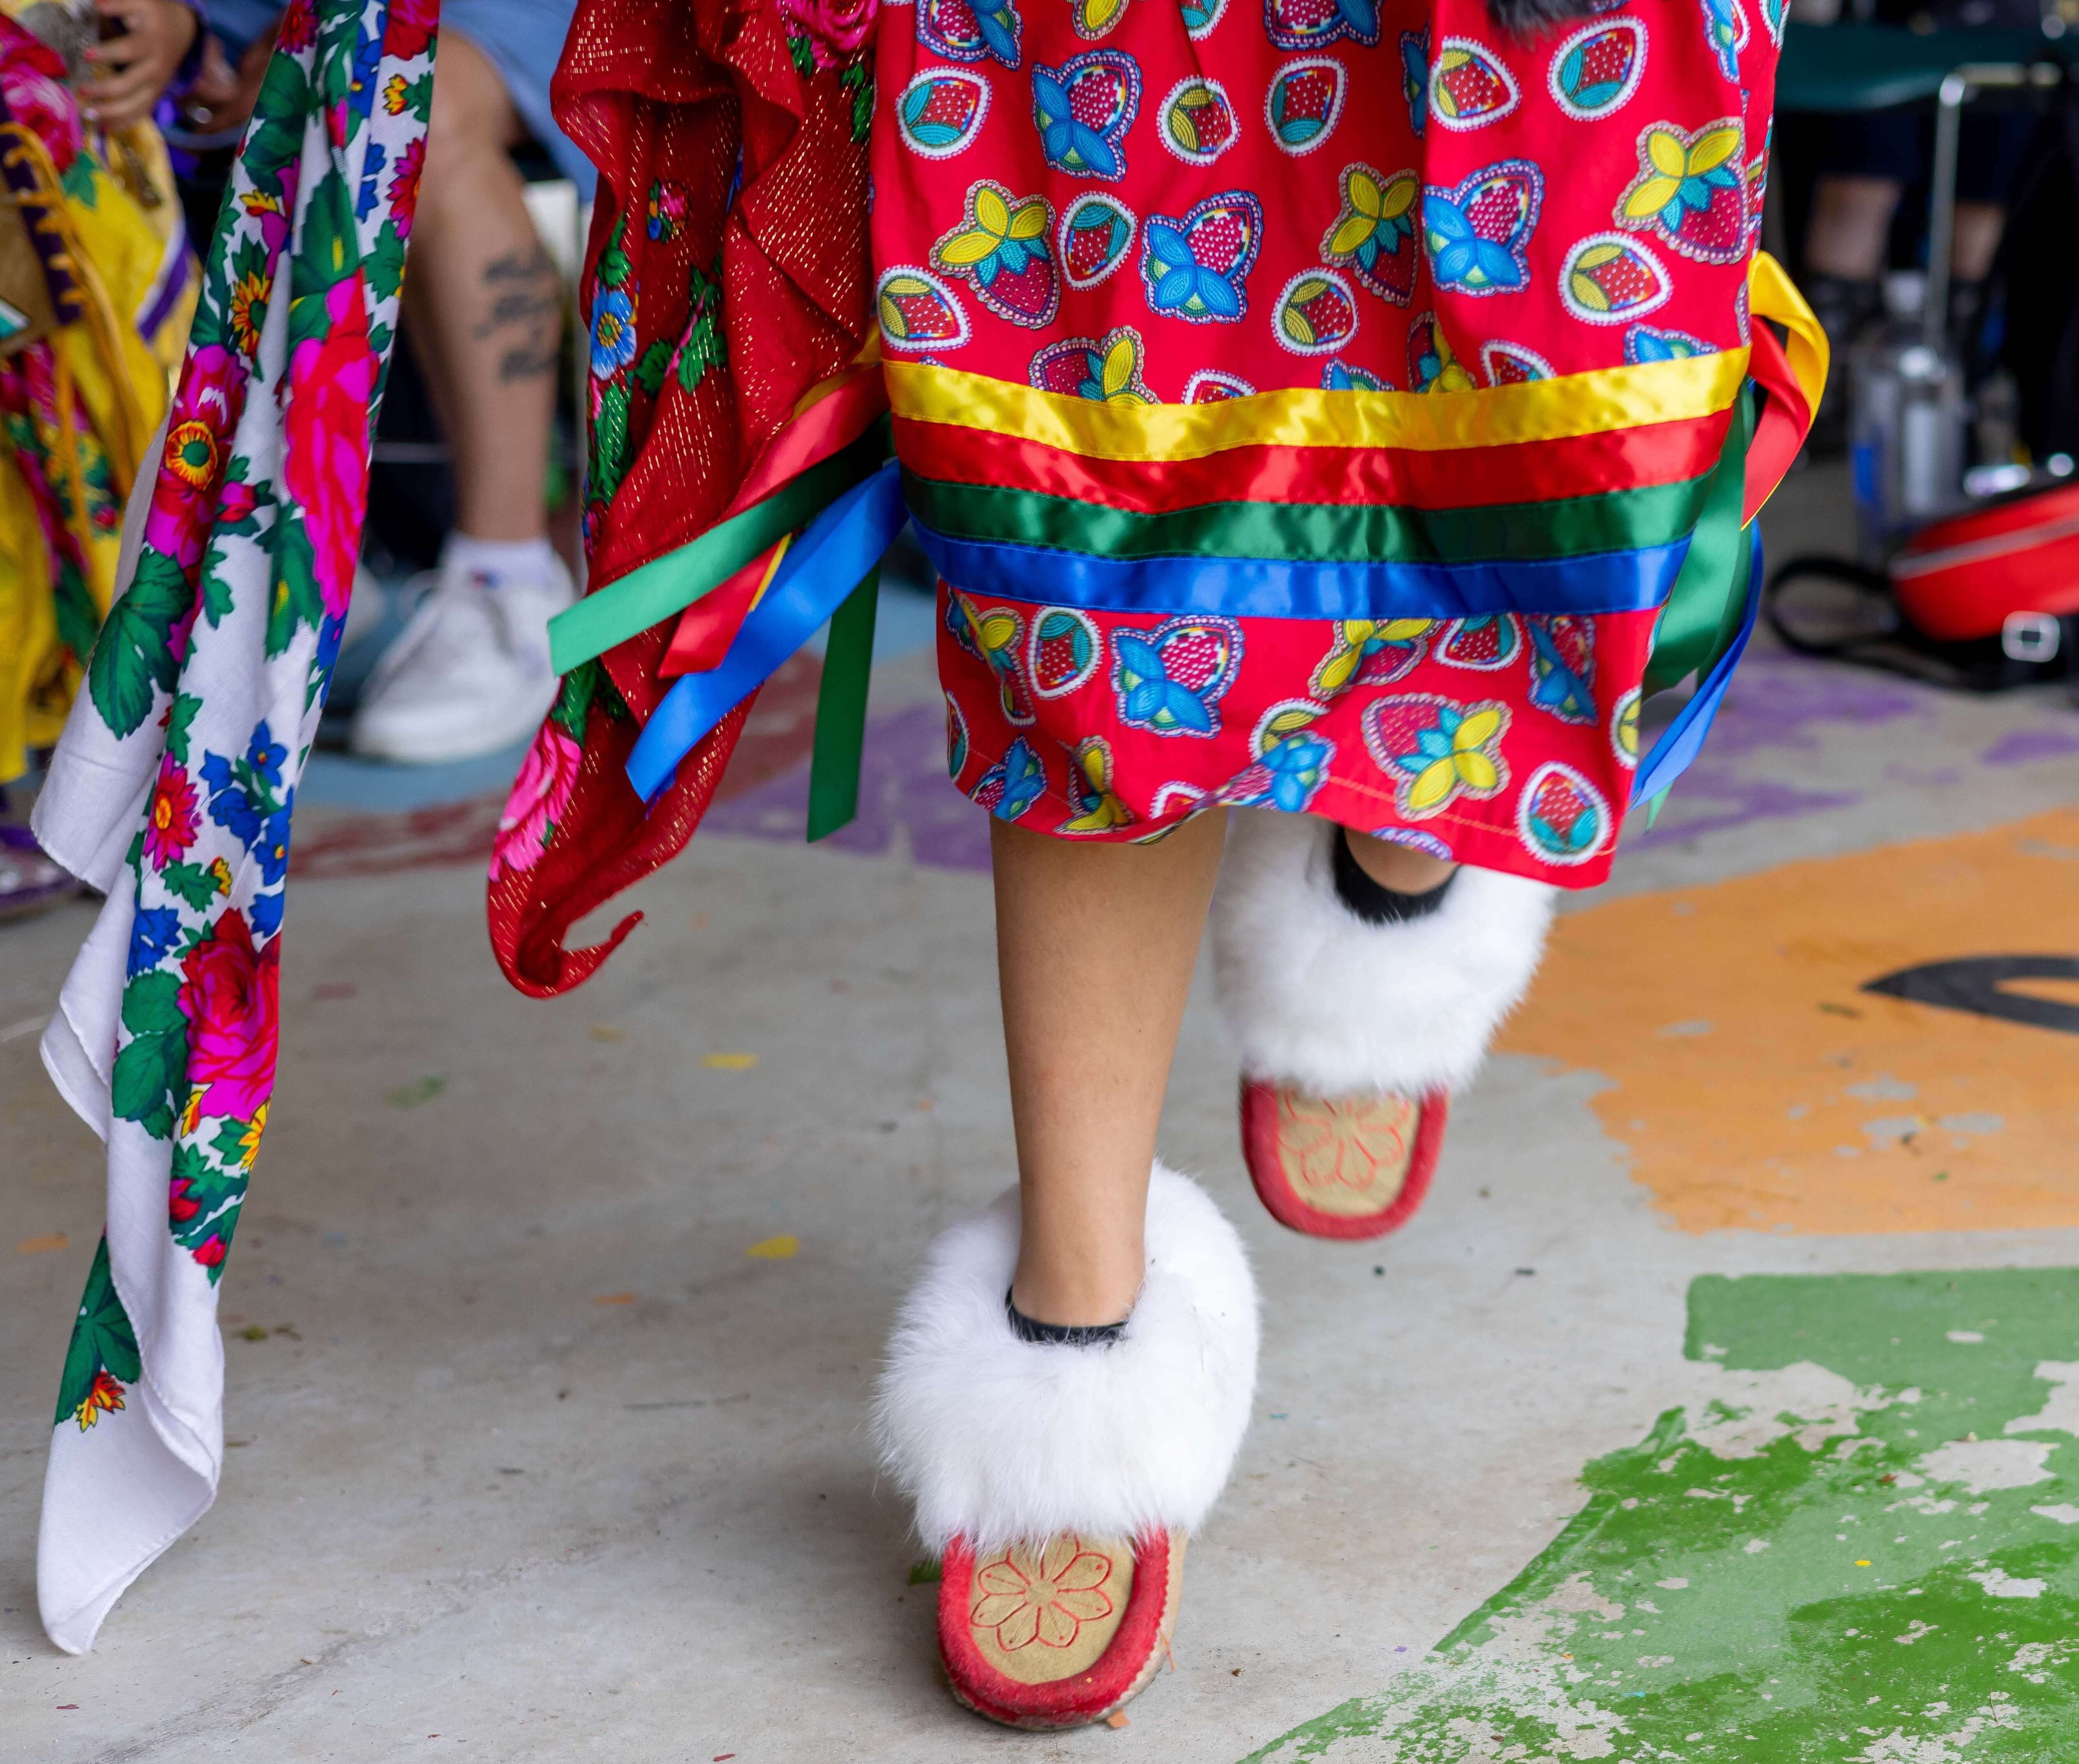 An individual in traditional Indigenous clothing a footwear dance.